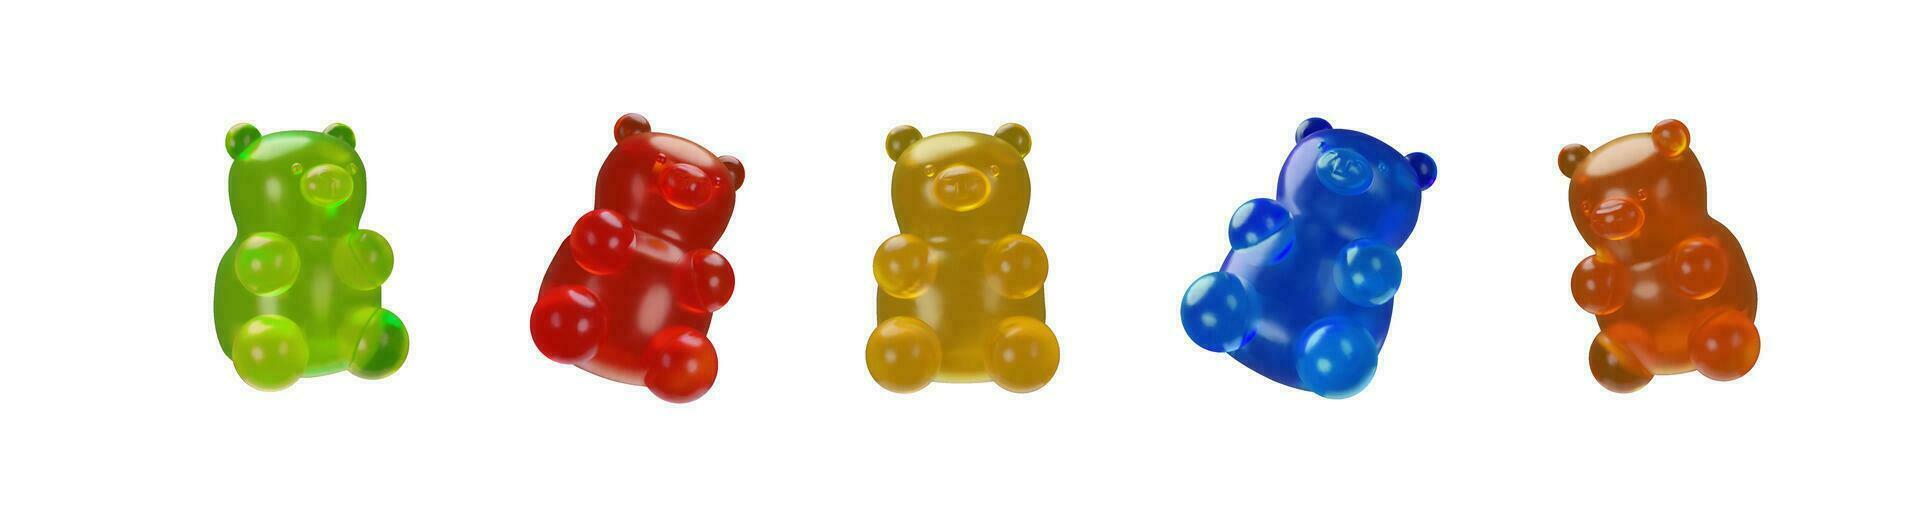 3D render gummy bear in different poses vector